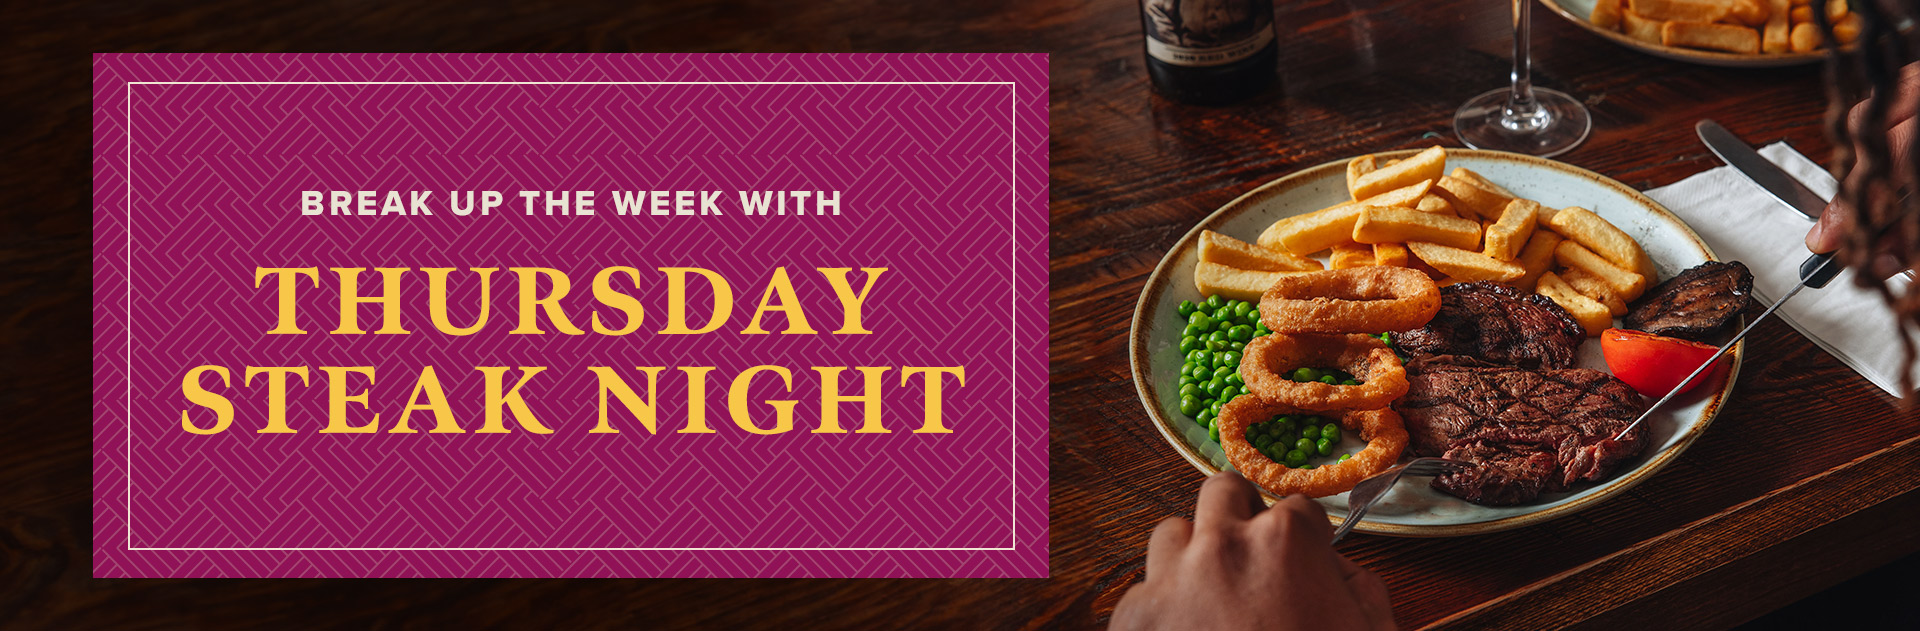 Thursday Steak Night at The Hare and Hounds